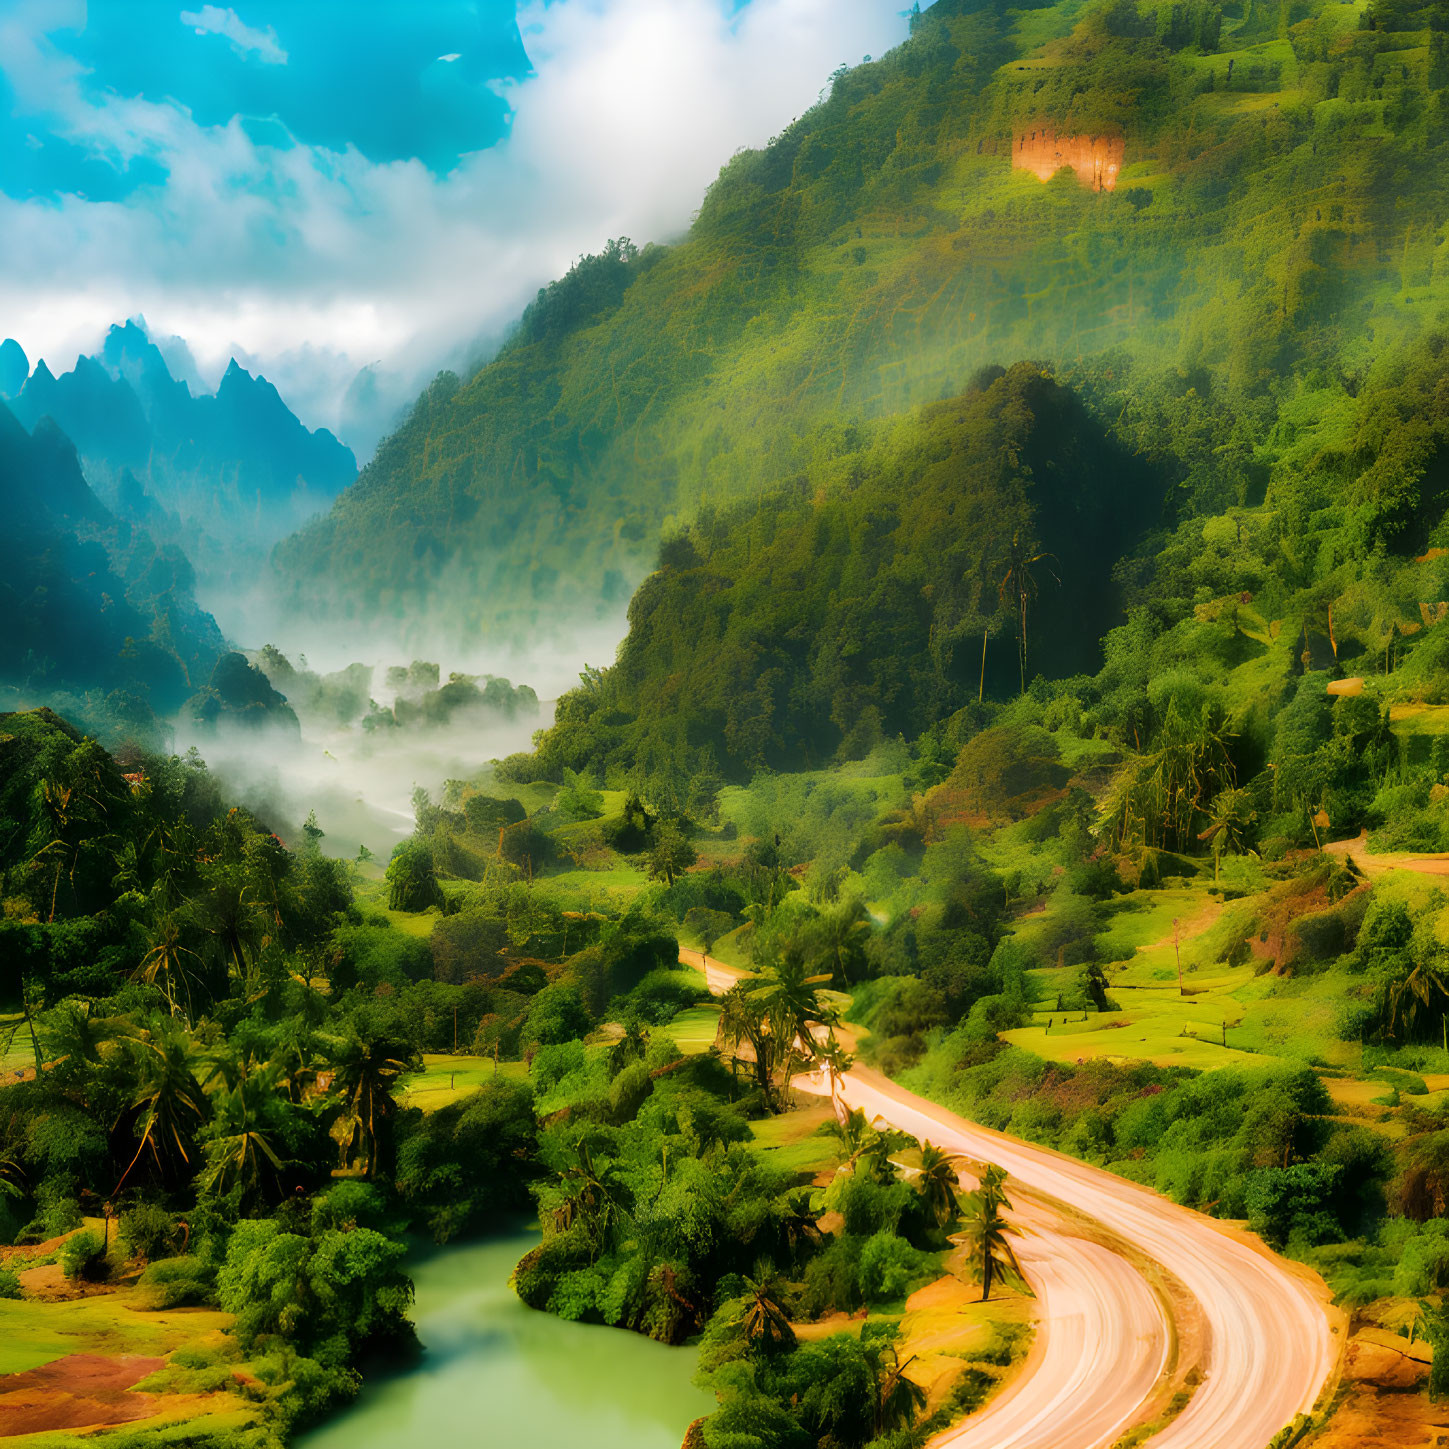 Scenic tropical landscape with winding road and river